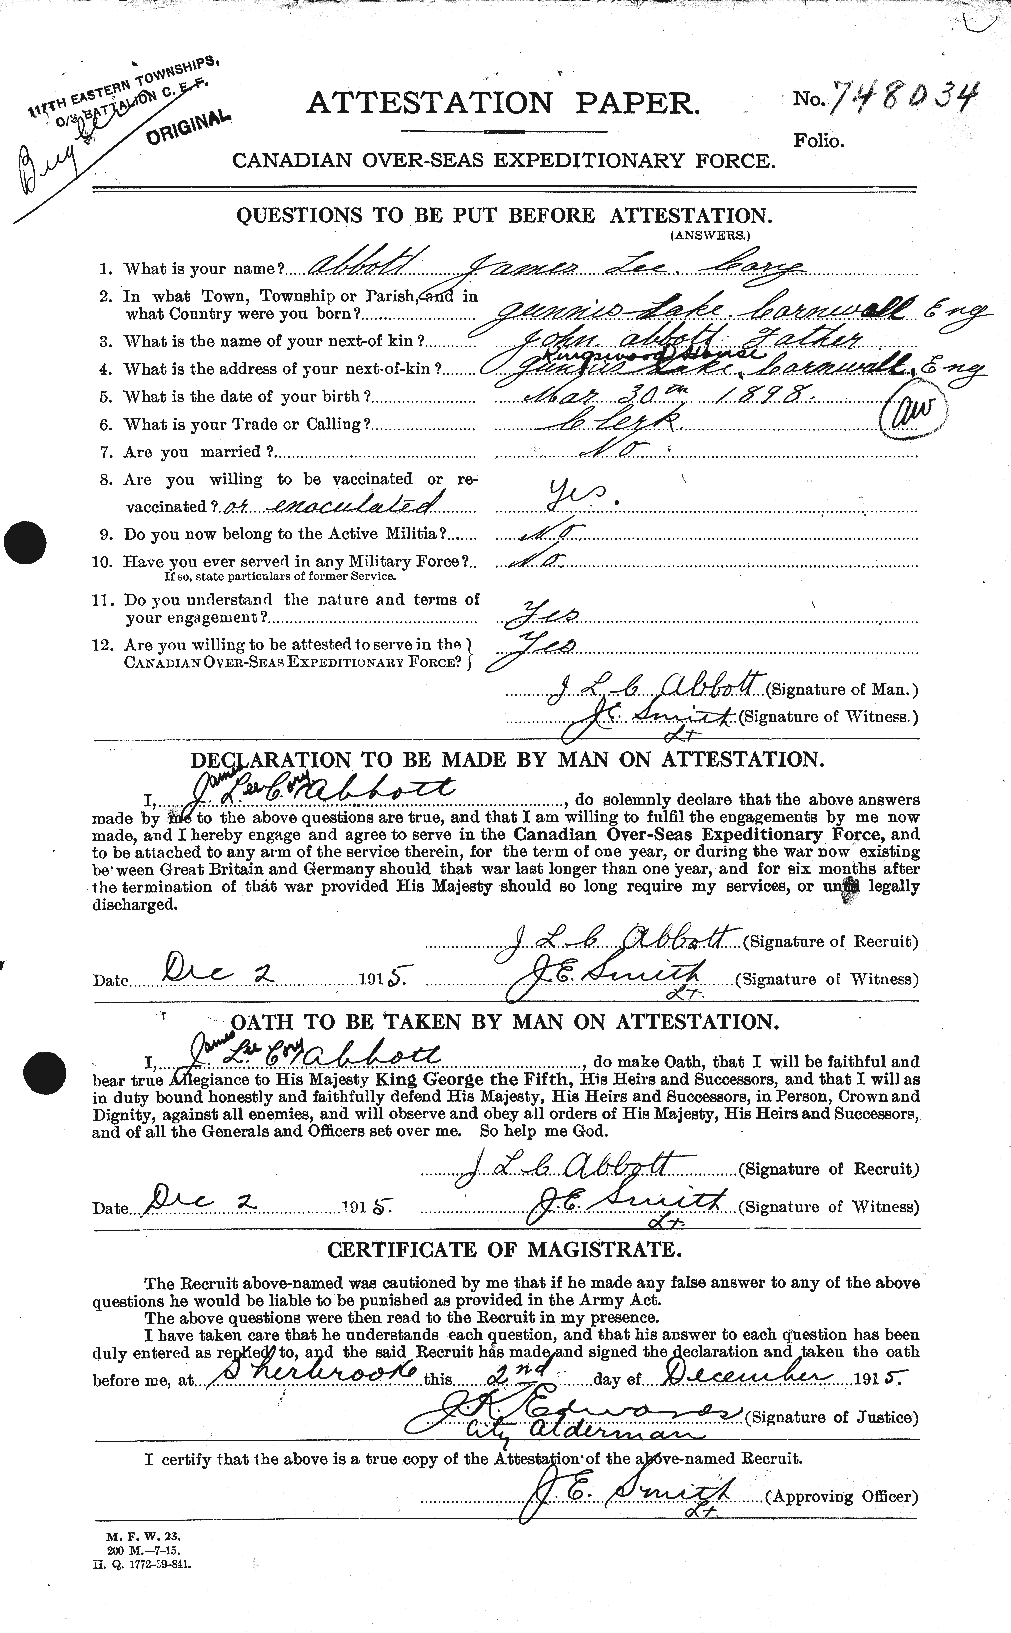 Personnel Records of the First World War - CEF 200982a